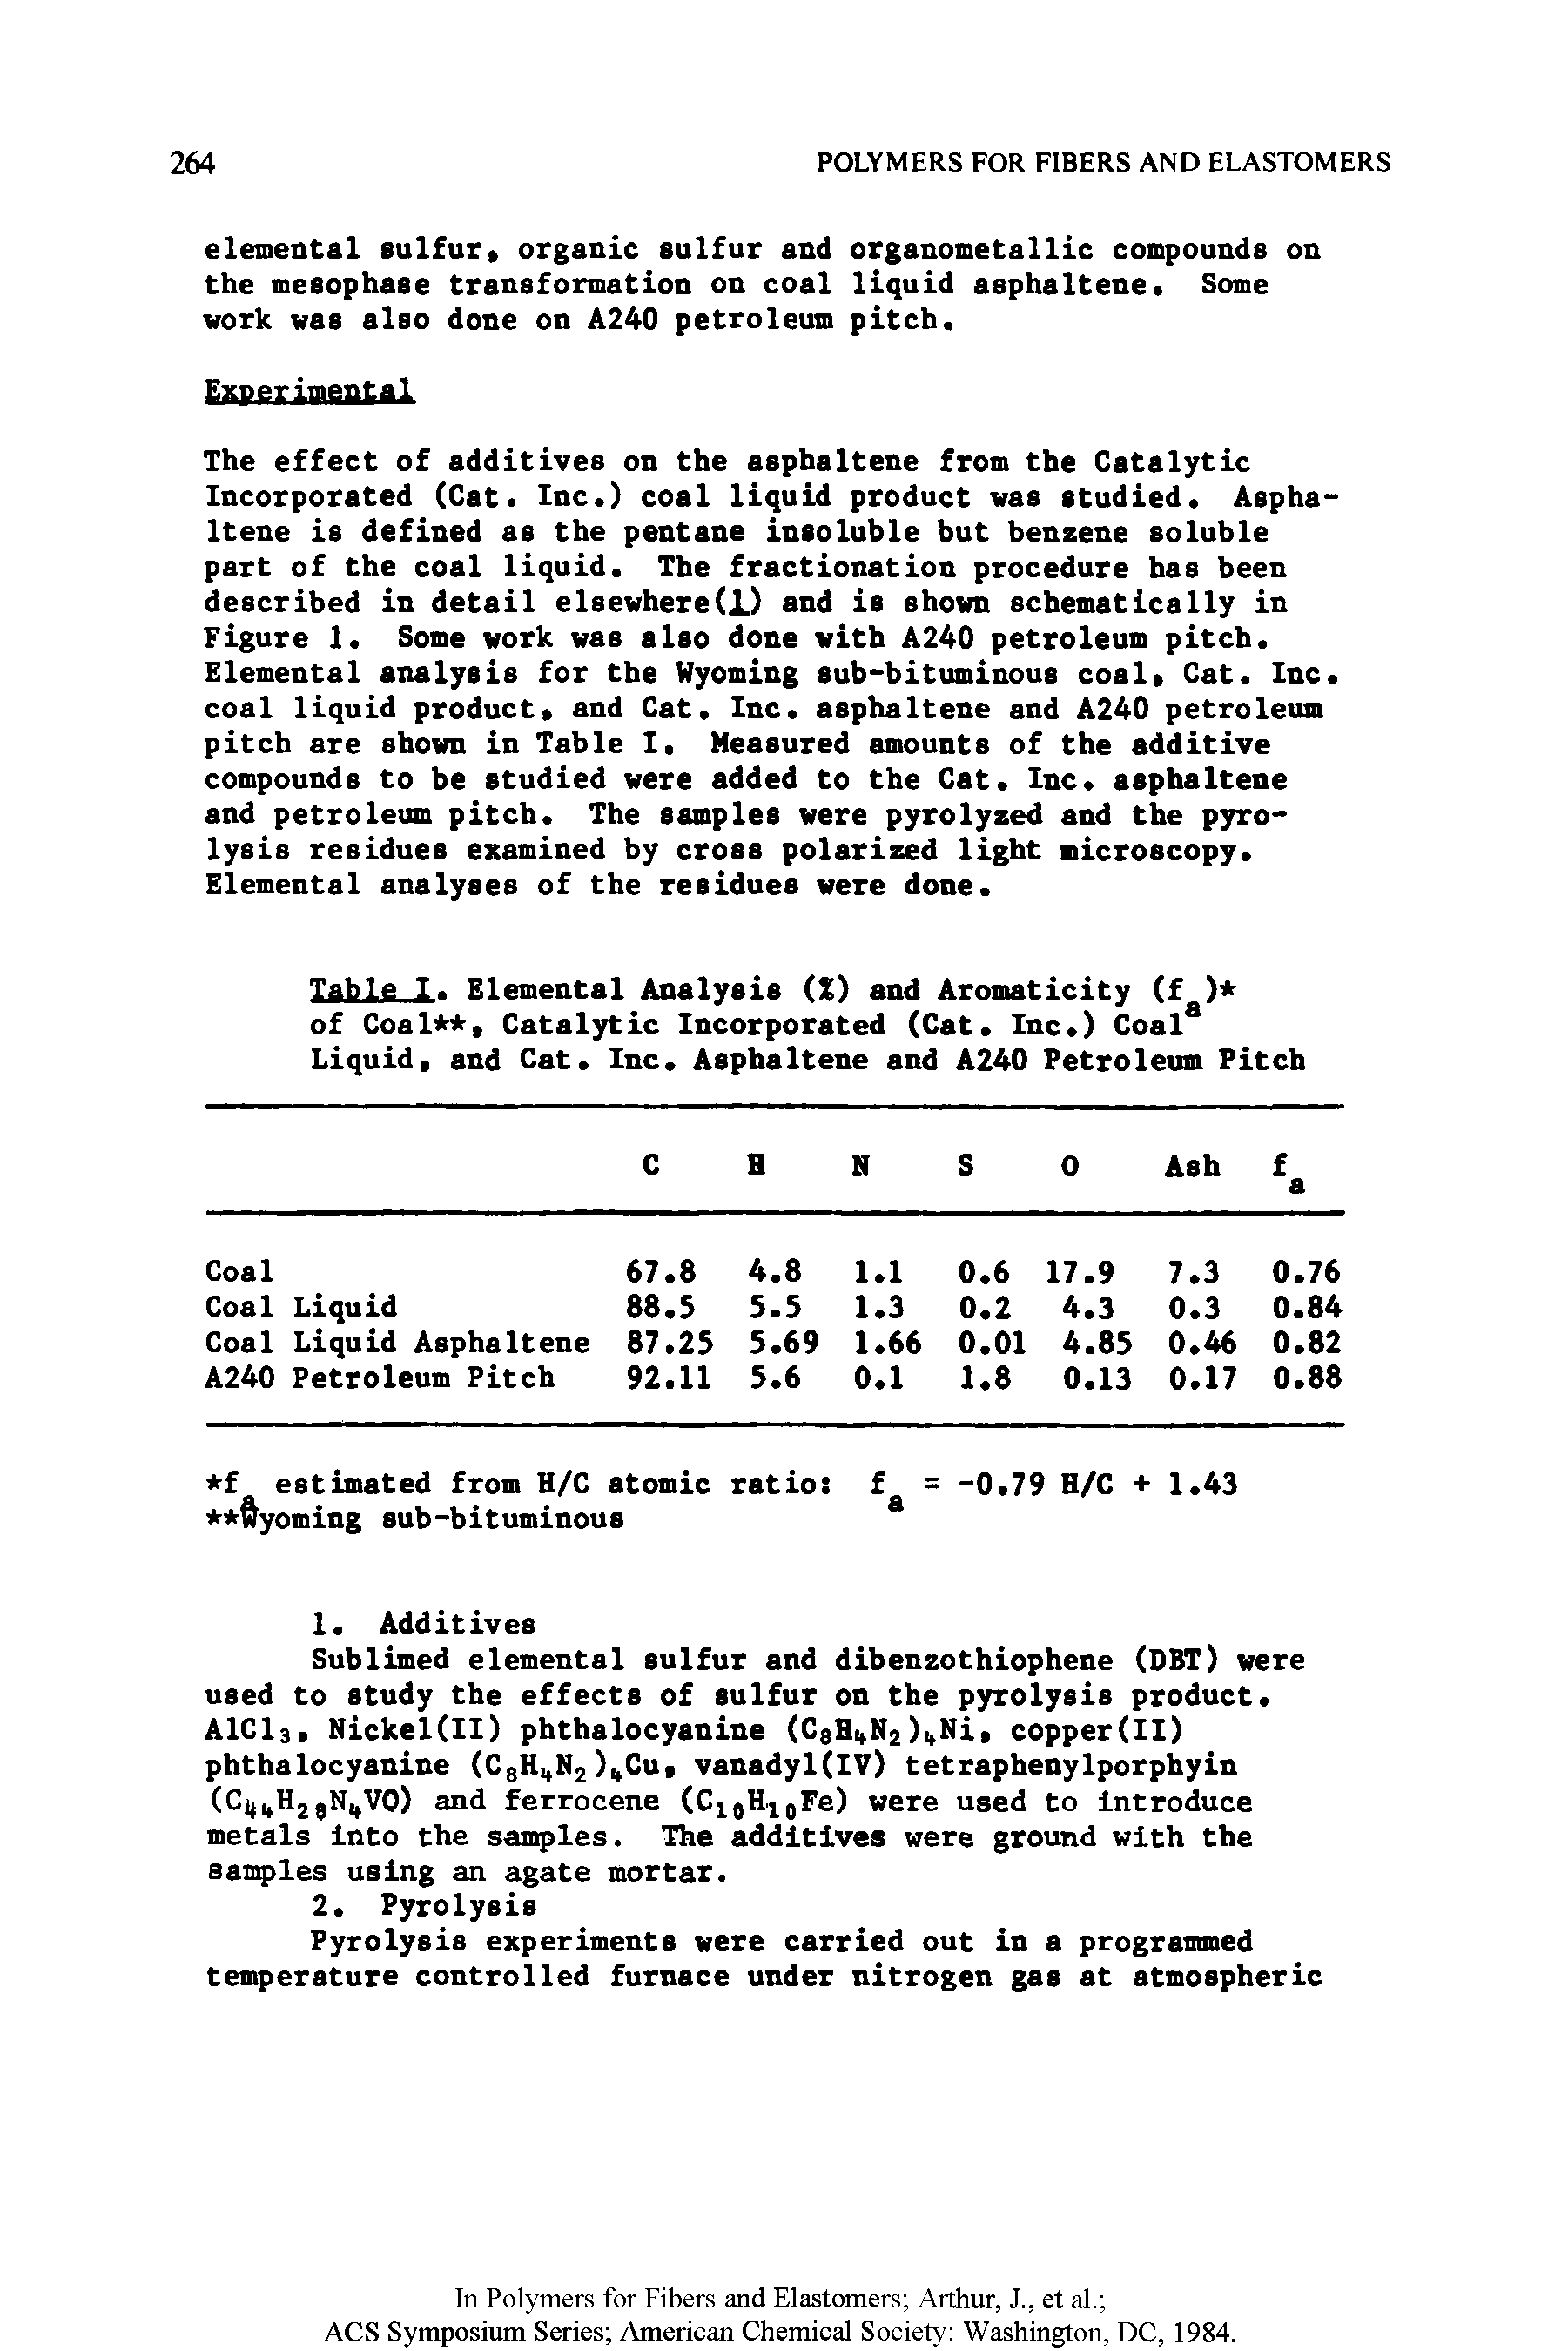 Table I. Elemental Analysis (Z) and Aromaticity of Coal. Catalytic Incorporated (Cat. Inc.) Coal Liquid, and Cat. Inc. Asphaltene and A240 Petroleum Pitch...